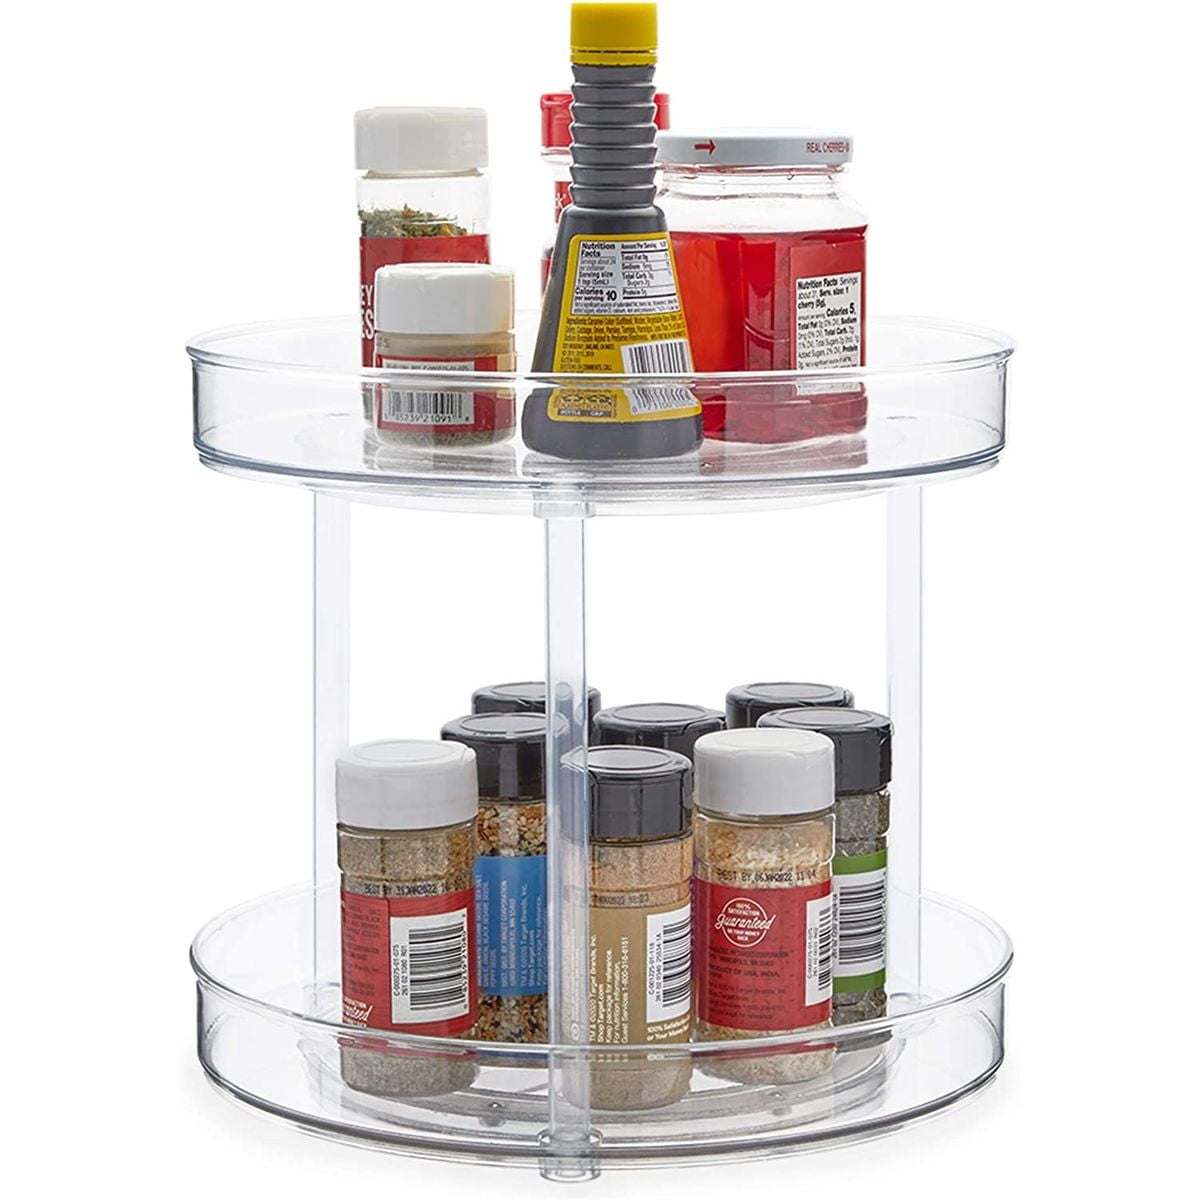 Details about   Lazy Susan-2 Tier-Non Skid-Spinning Turntable-Pantry/Cabinet/Counter 